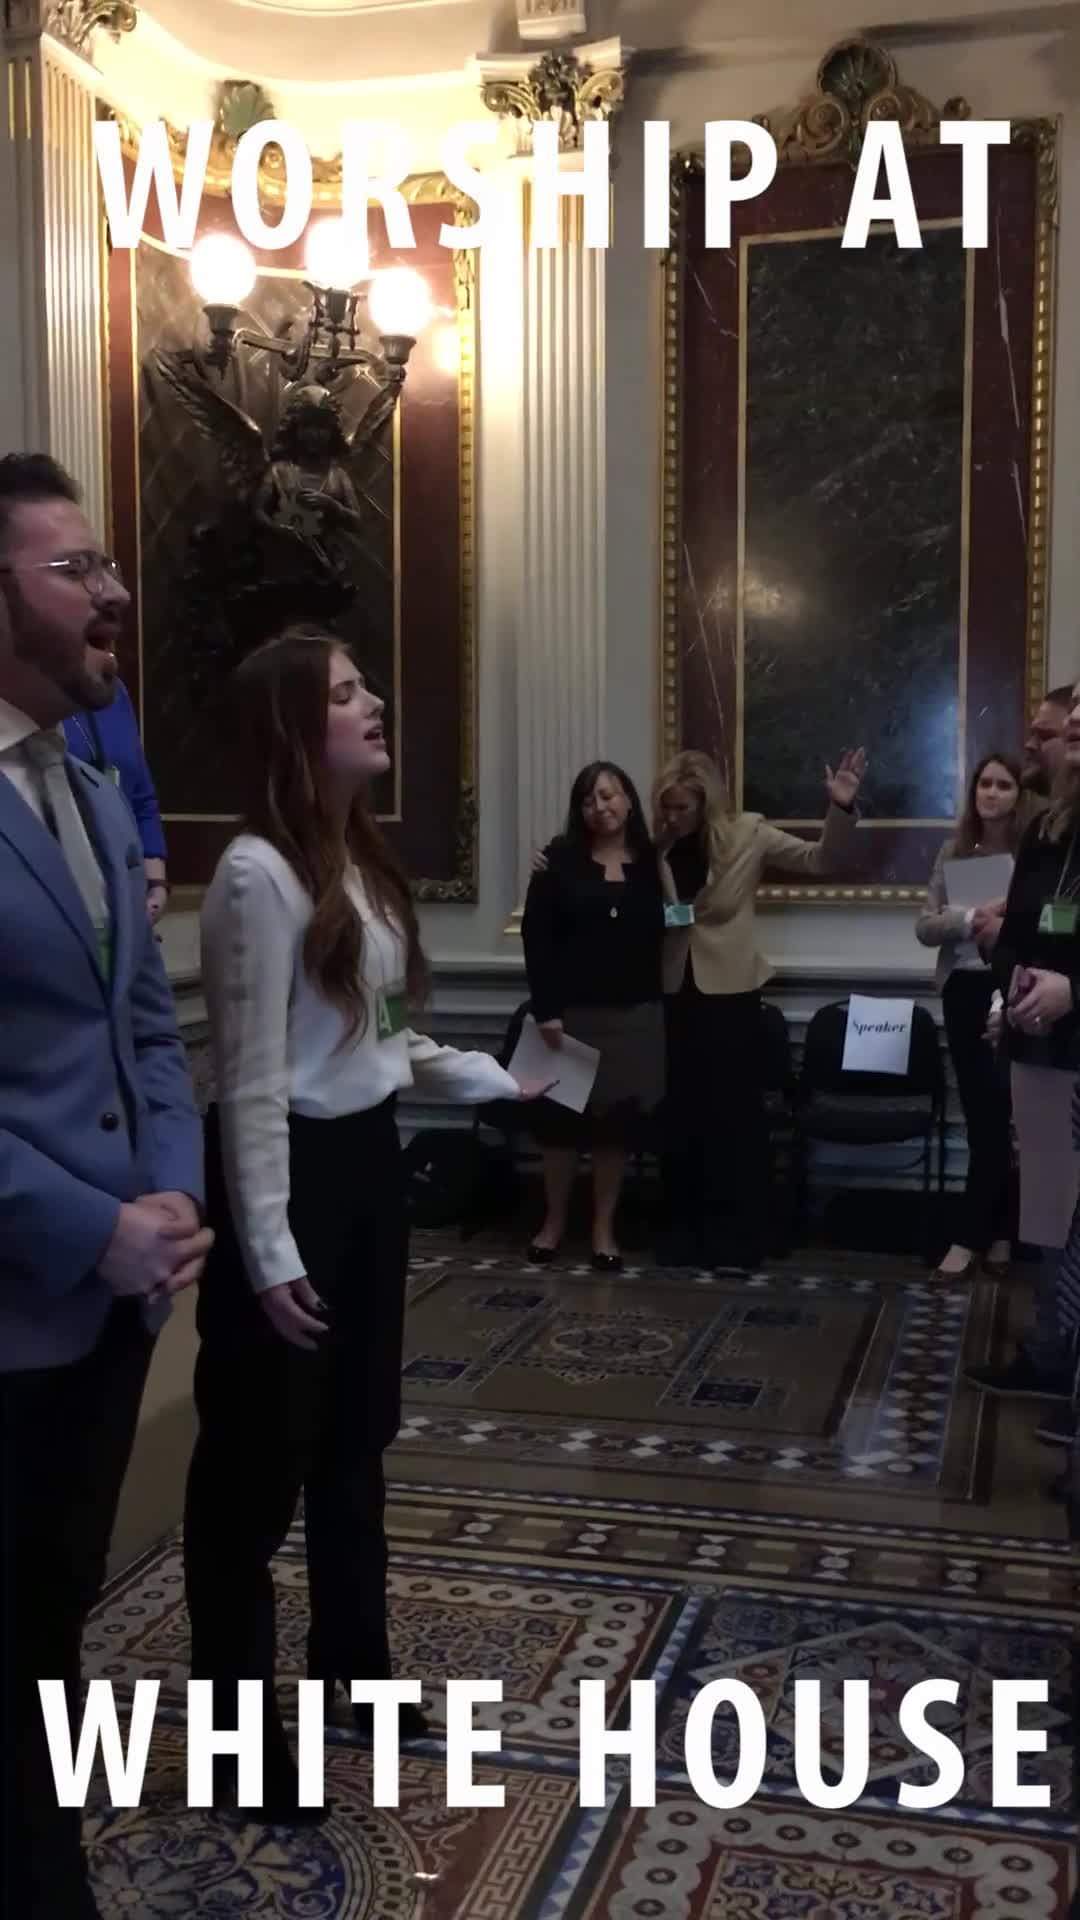 Powerful time of WORSHIP AT THE WHITE HOUSE! Incredible to declare the name of Jesus in the most powerful building in the world! The MEDIA DOES NOT want you to see this!